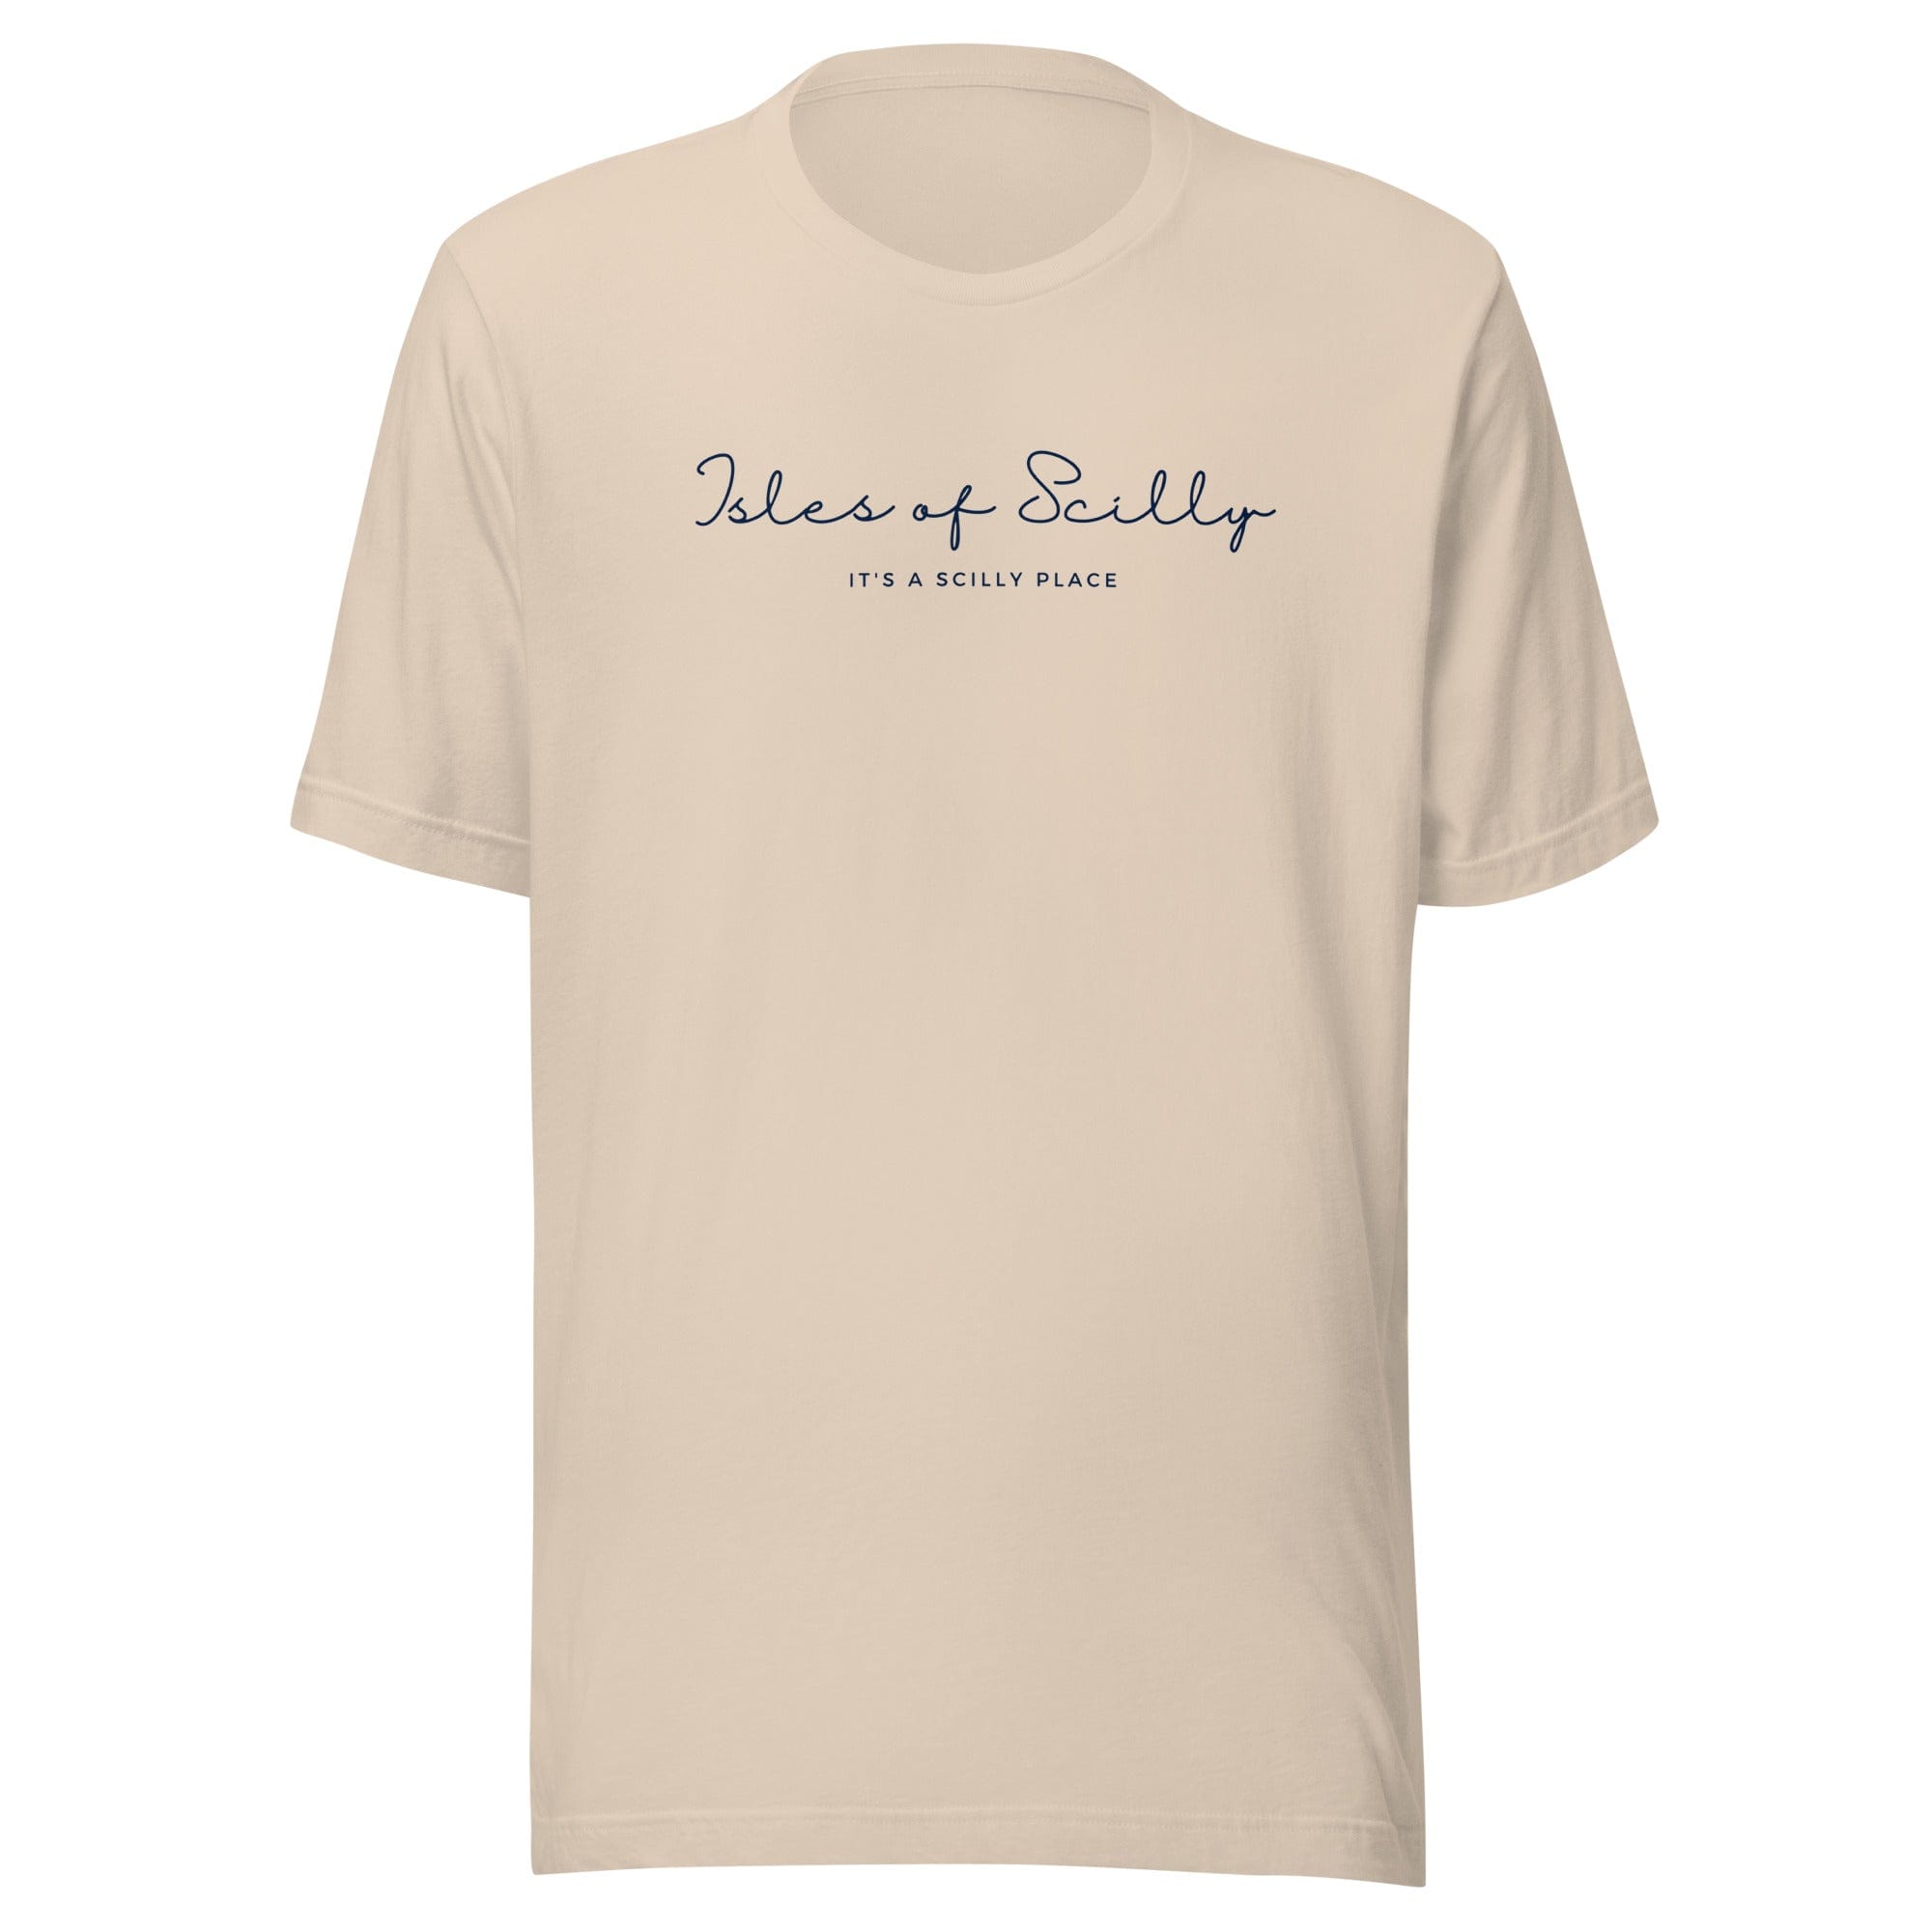 Isles of Scilly, It's a Scilly Place T-shirt Soft Cream / S Shirts & Tops Jolly & Goode